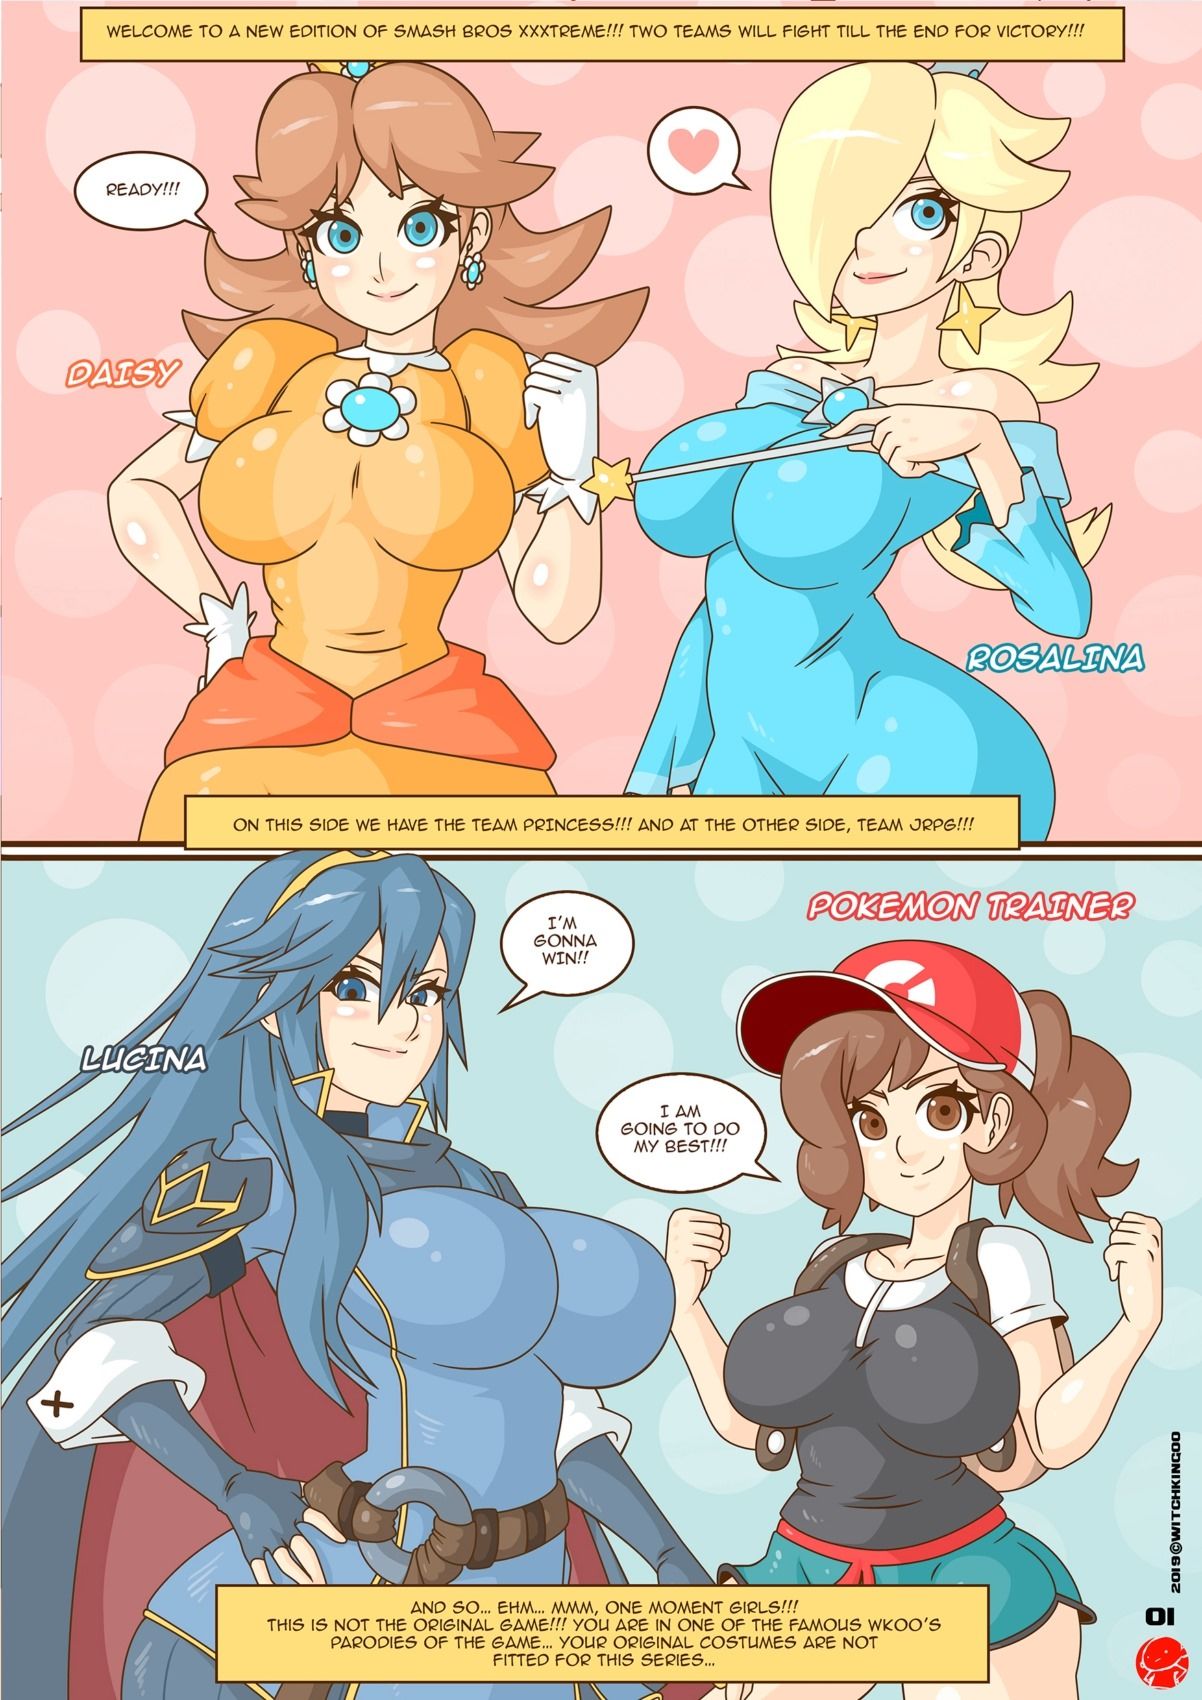 Smash Bros XXXtreme by Witchking00 page 2